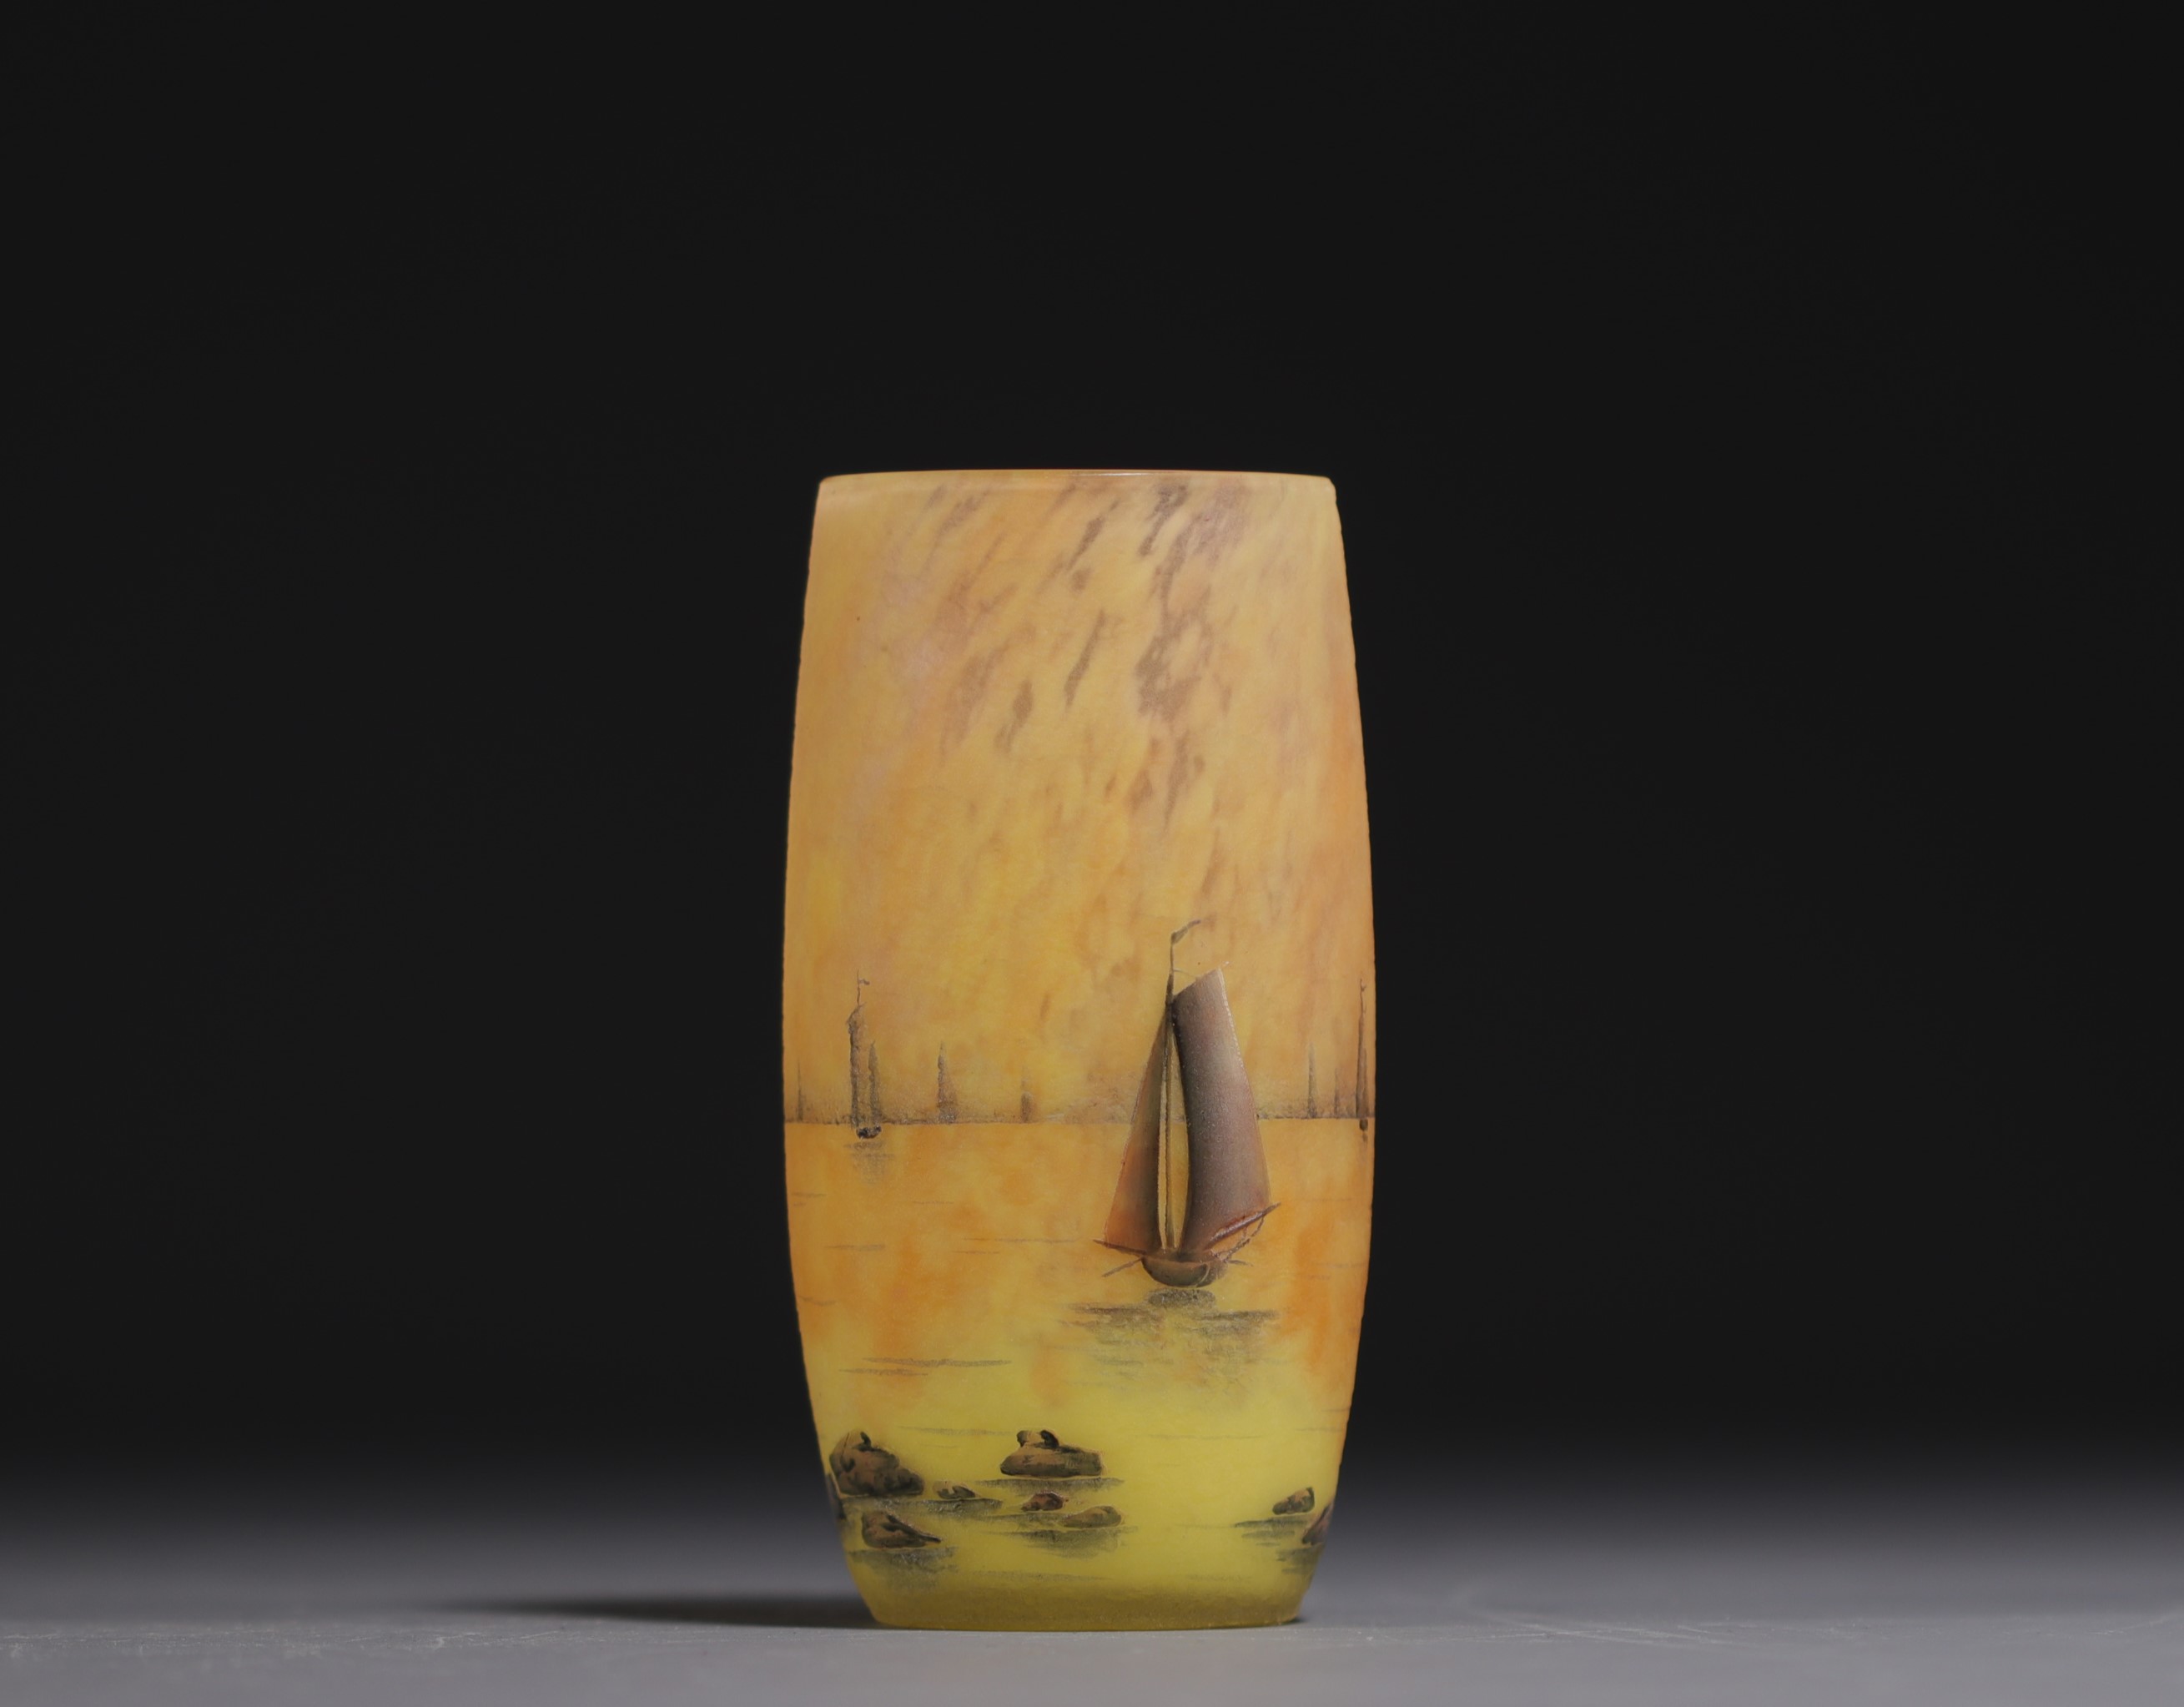 DAUM Nancy - Small shaded and enamelled glass vase with sailboats design, signed under the base. - Image 2 of 5